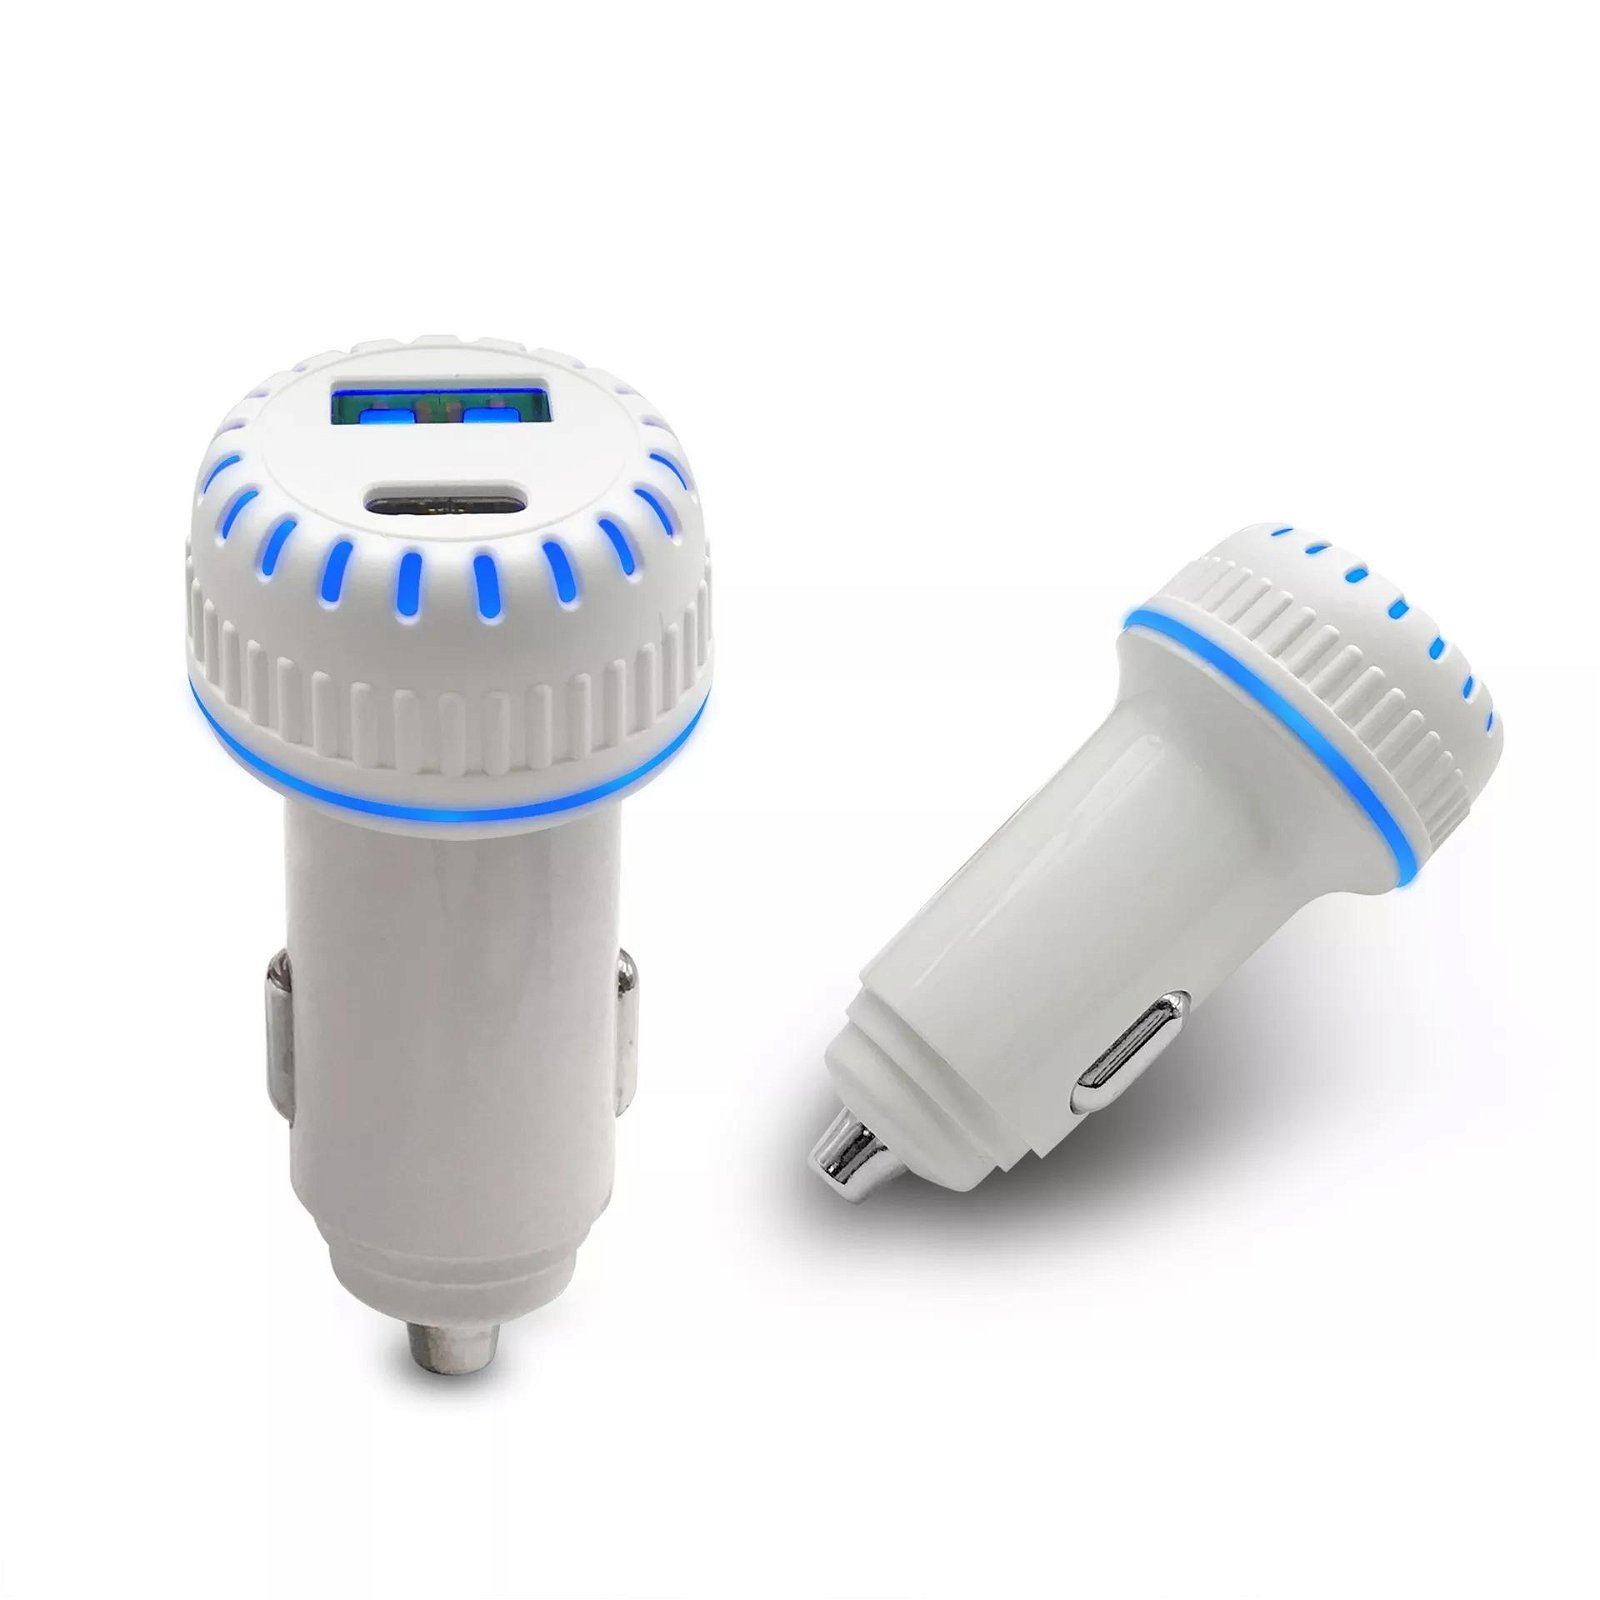 dual-port car charger